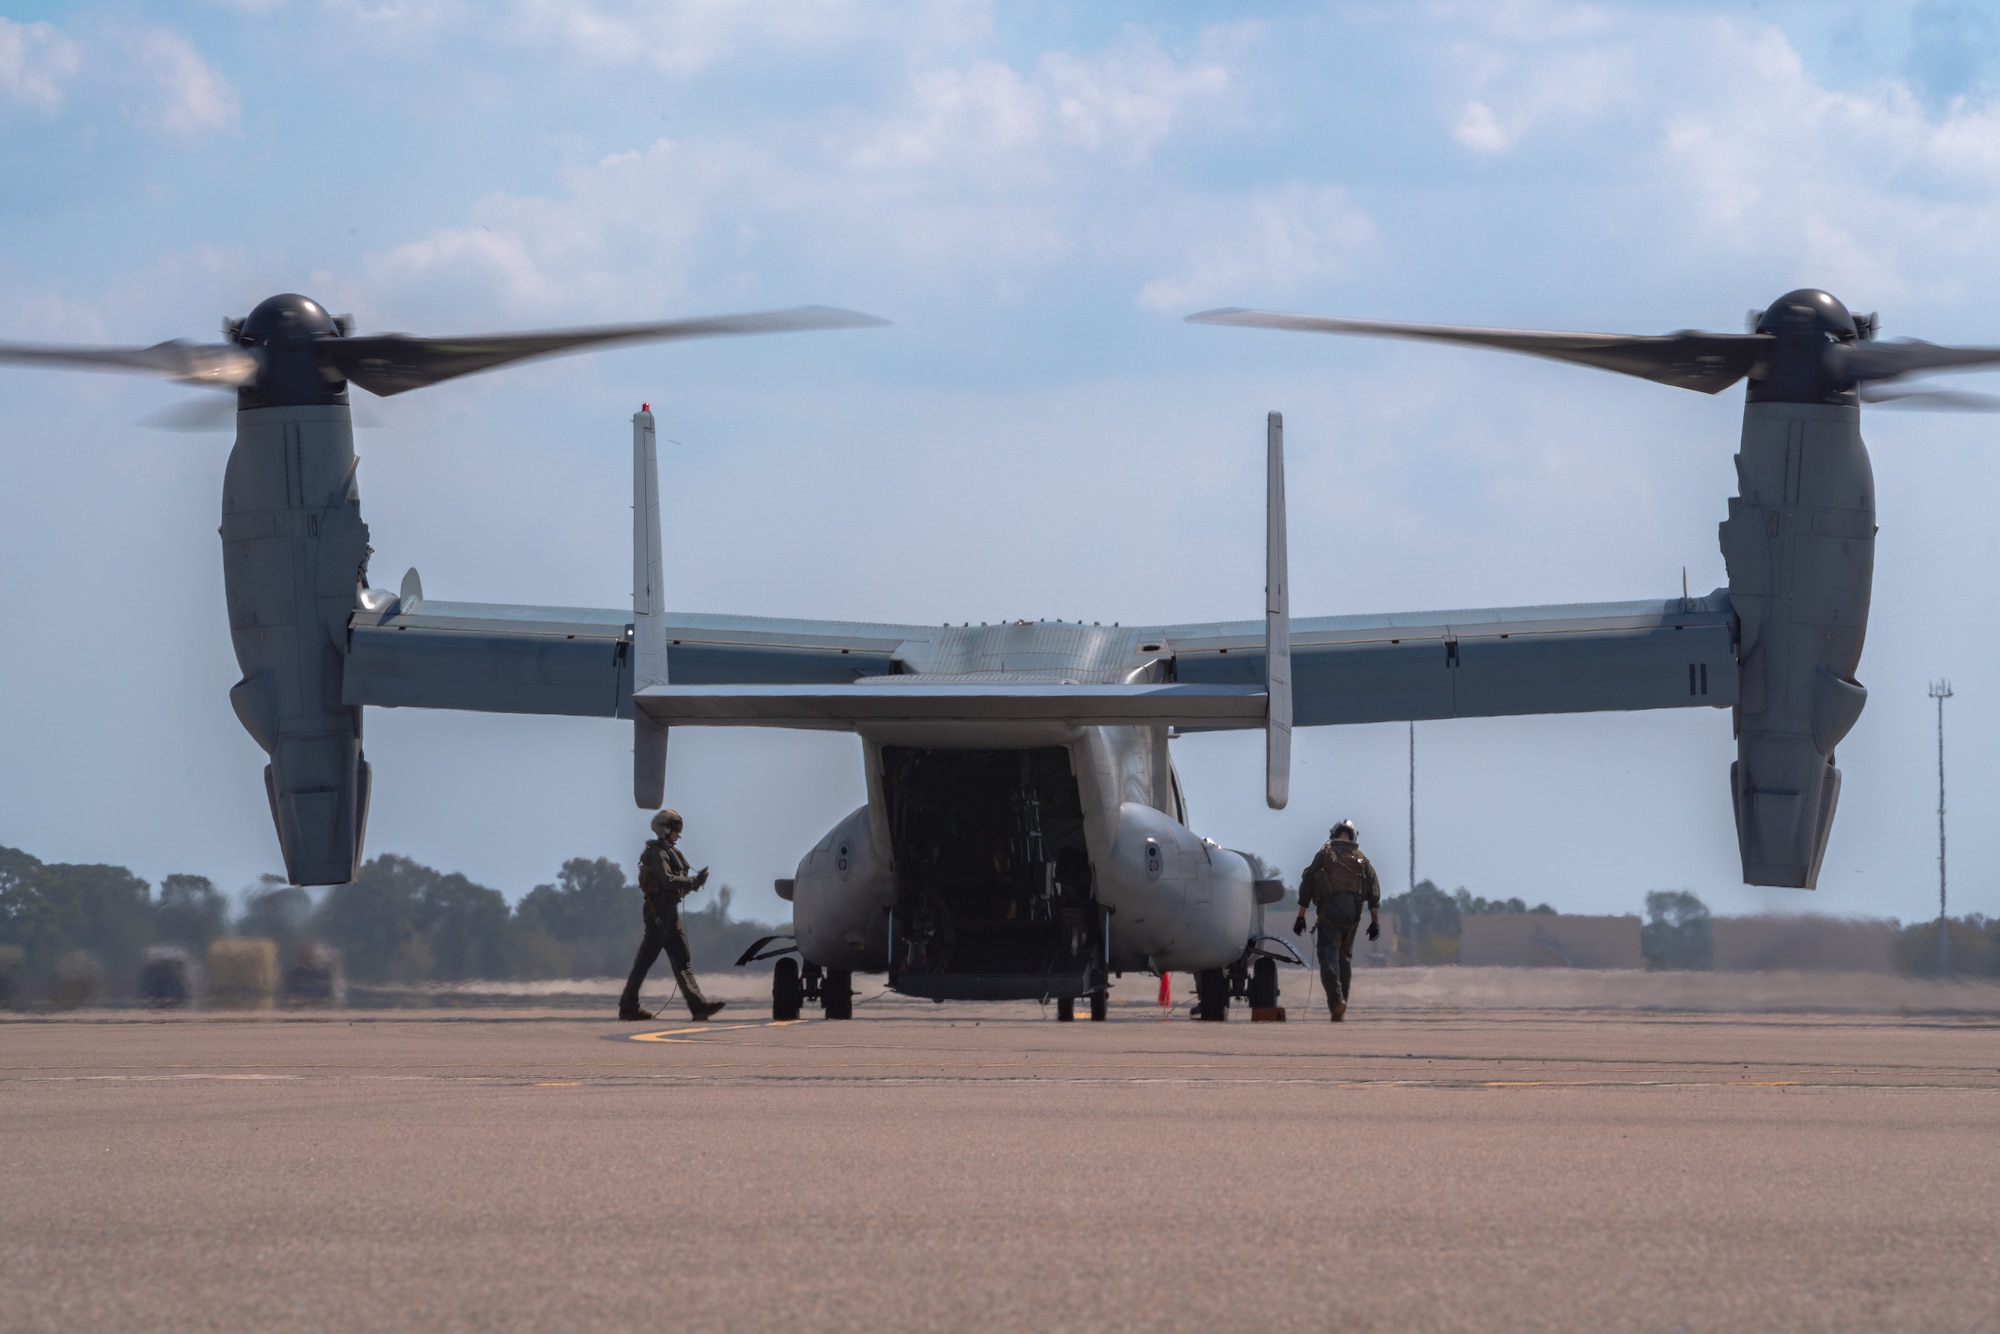 The MV-22's mission for the U.S. Marine Corps is the transportation of troops, equipment and supplies from ships and land bases for combat assault and assault support.